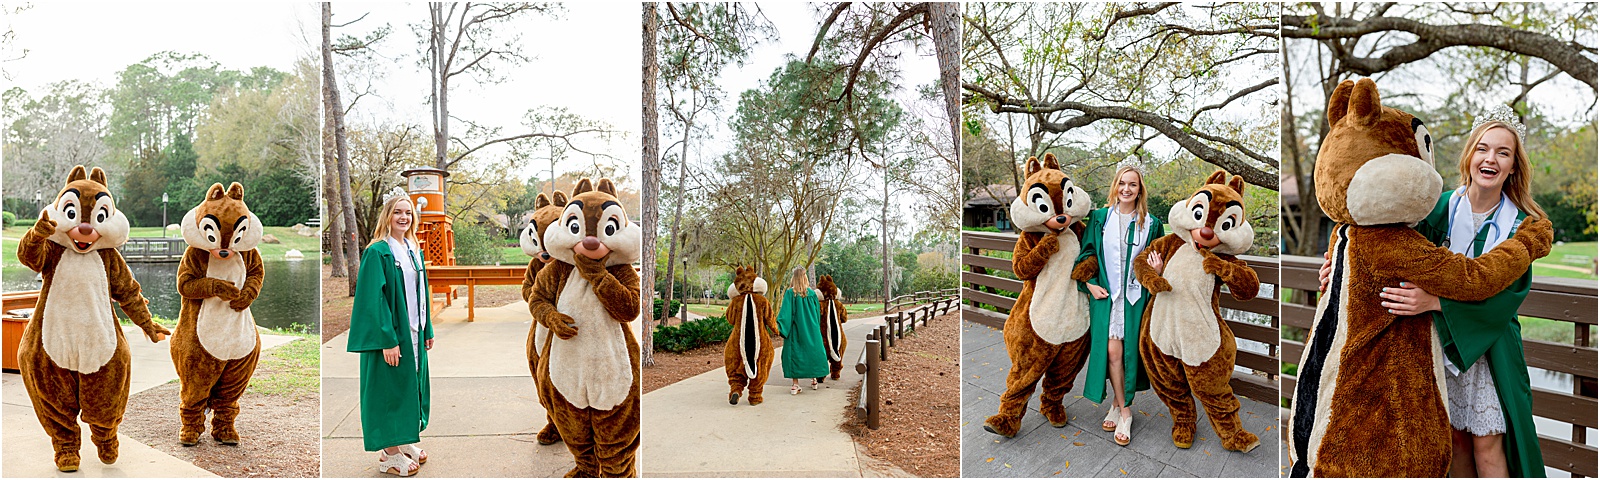 Capturing Dreams and Family Bonds: A College Graduation Portrait Session at Disney's Campground Resort and chip and dale showed up